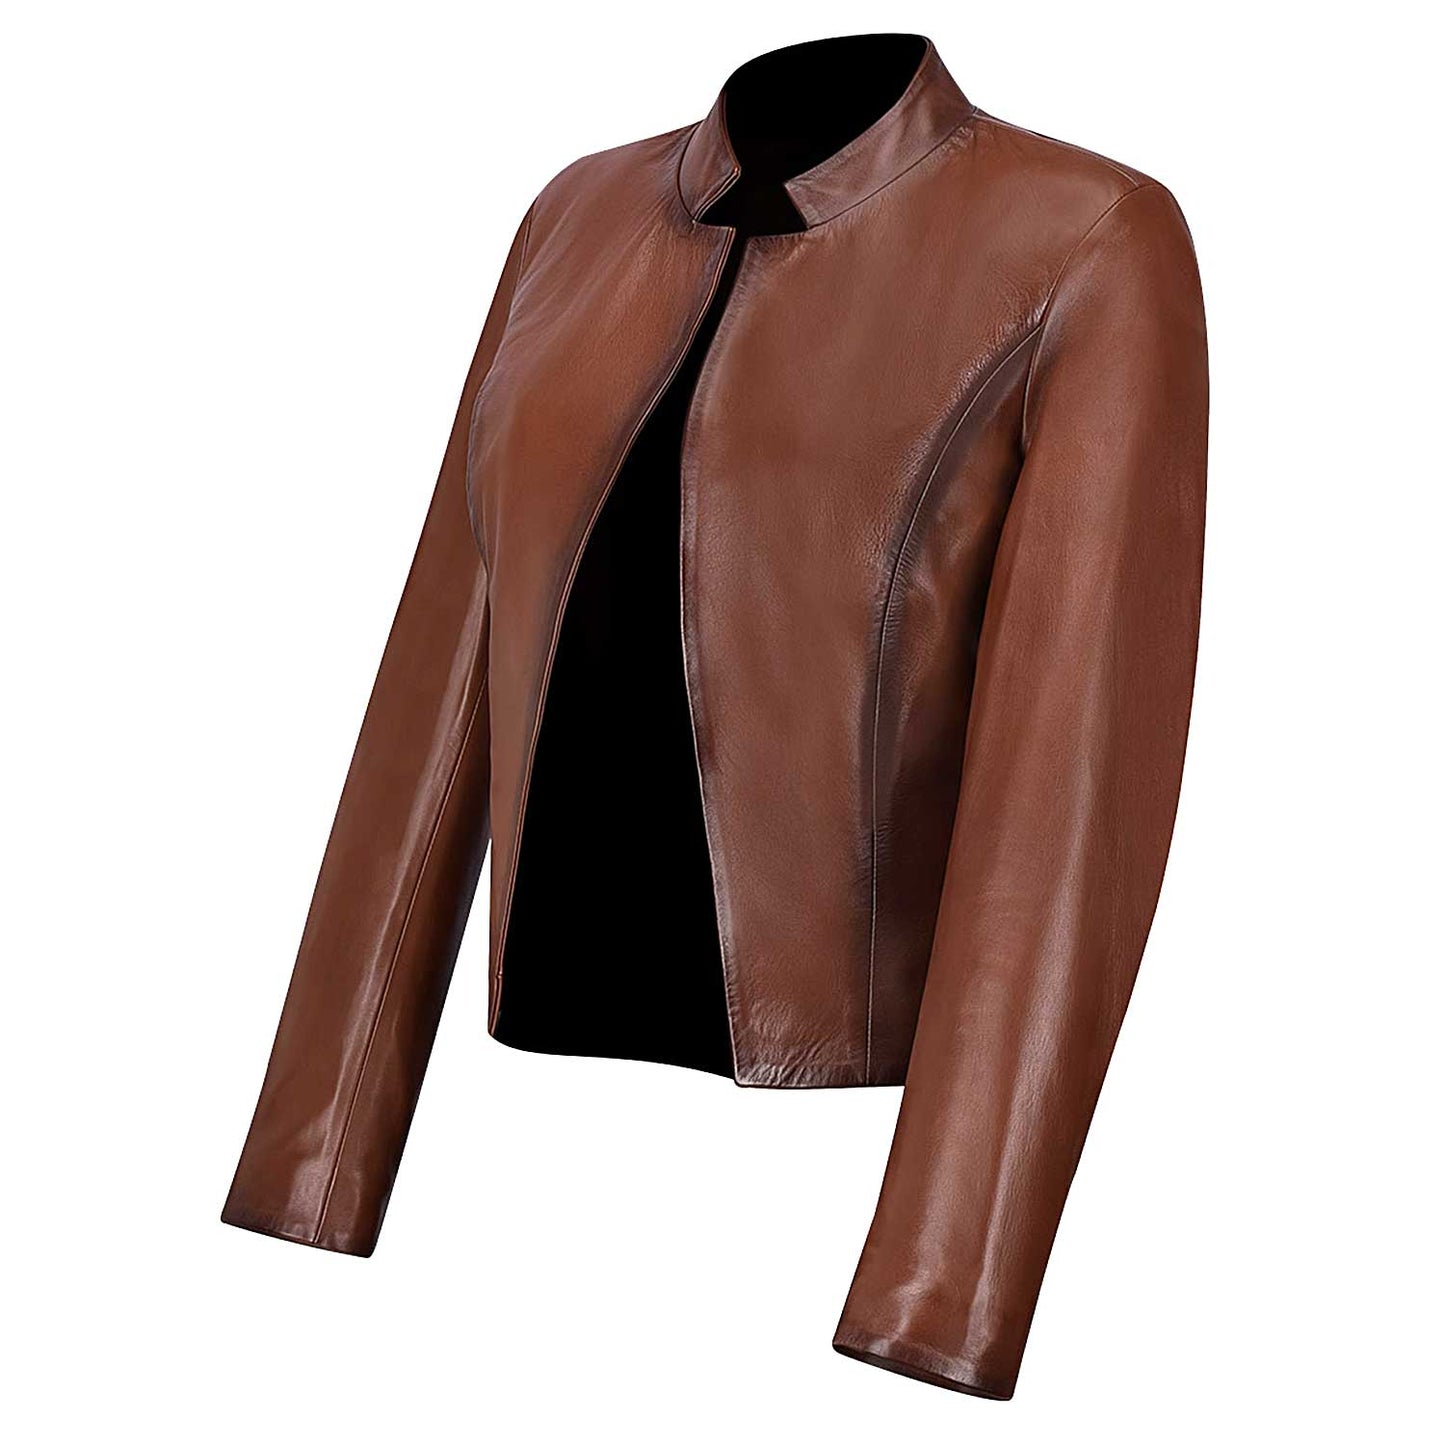 Womens brown leather short jacket